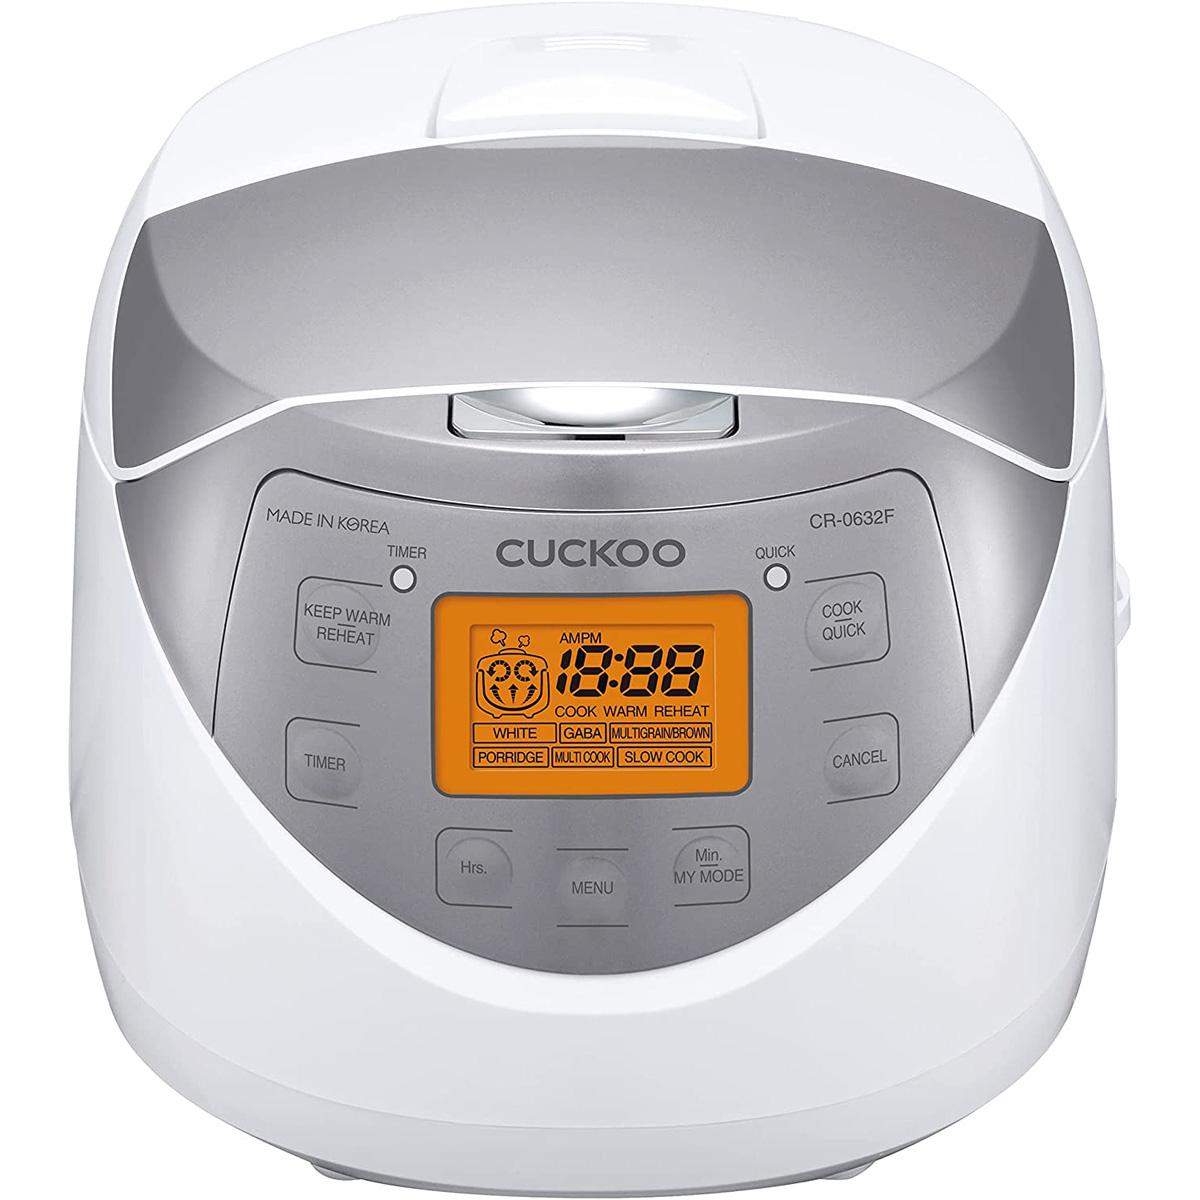 Cuckoo Micom Rice Cooker with Non-Stick Inner Pot for $74.99 Shipped